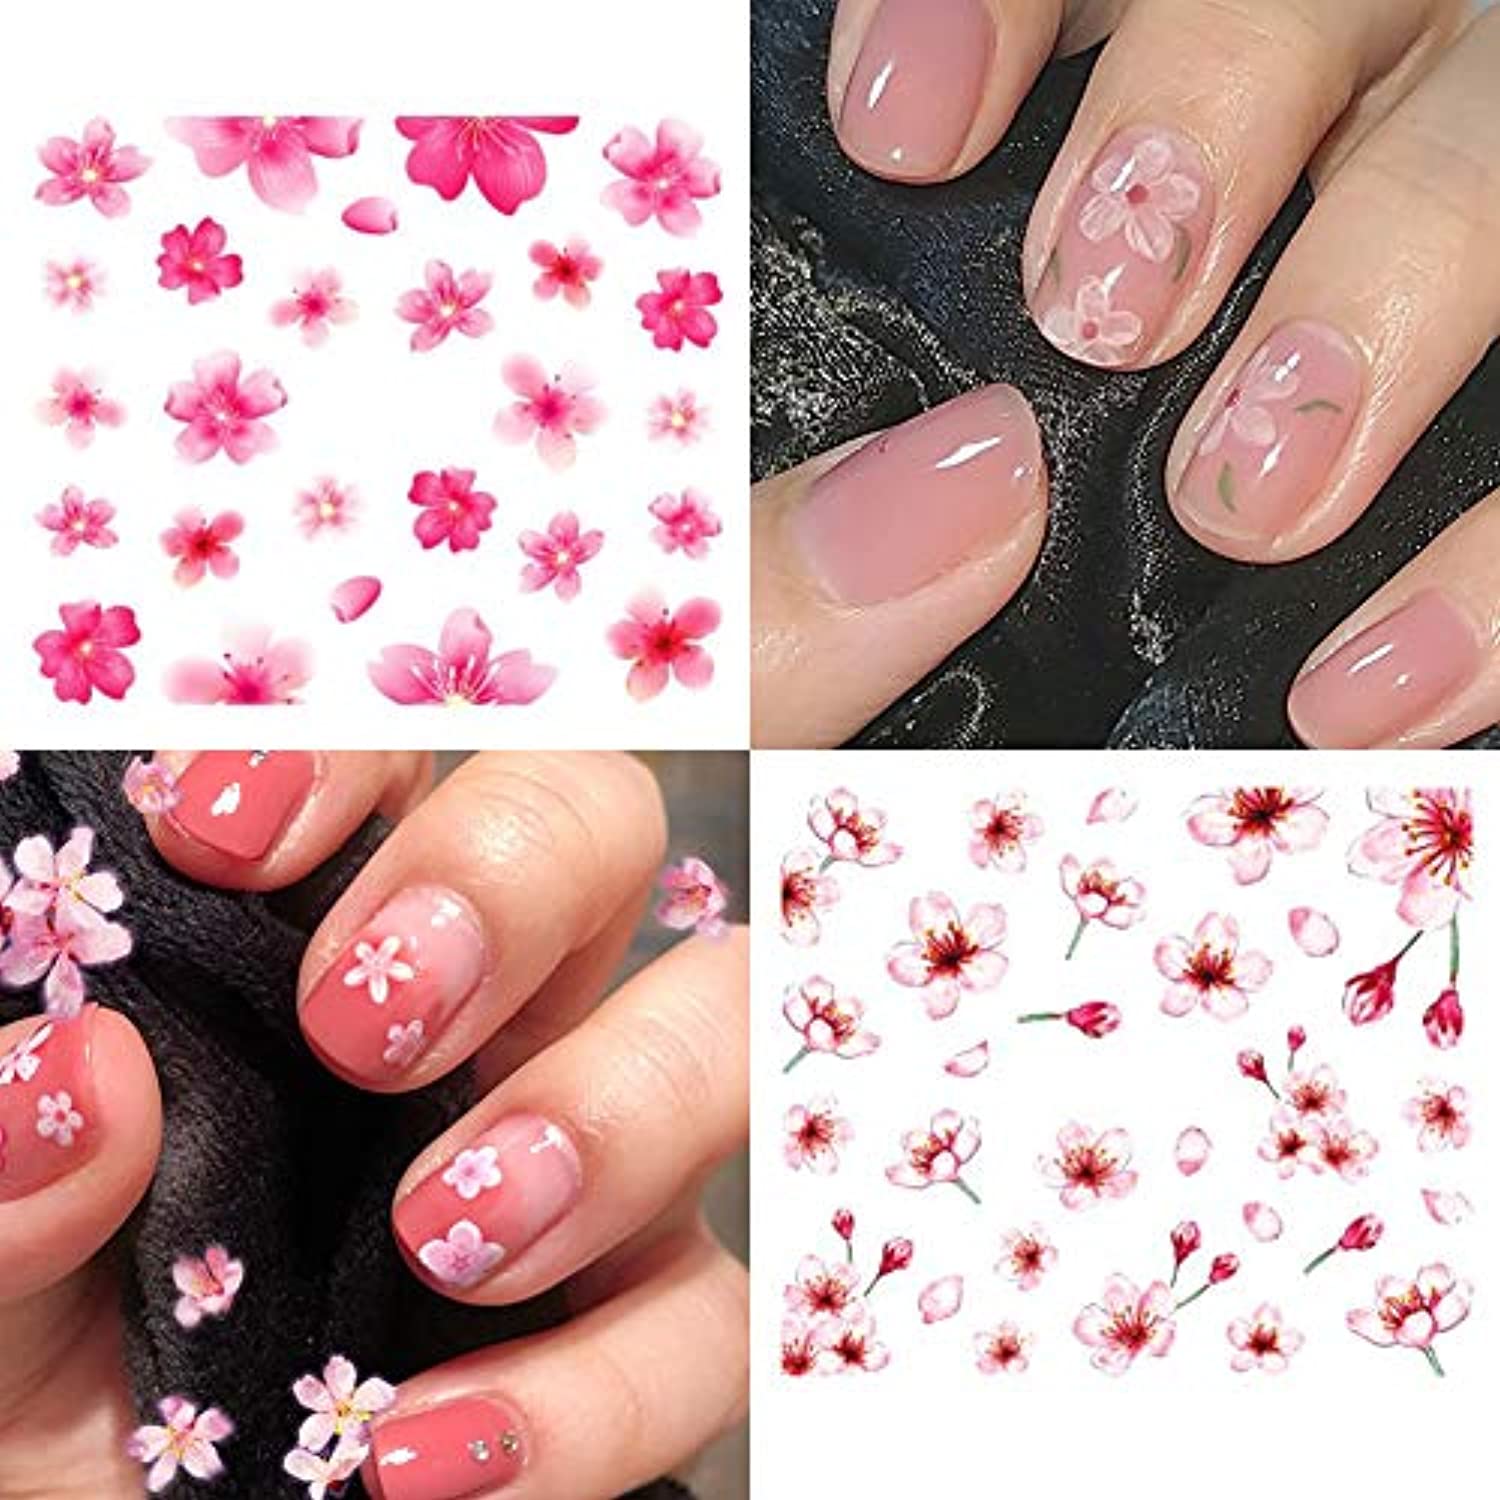 Sakura Flowers Nail Stickers Spring Water Transfer Nail Decals Cherry Blossom Nail Art Decorations Charms Nail Art Supplies Branches Leaf Petal Deer Cat Nail Design Nail Foils Tattoo for Acrylic Nail